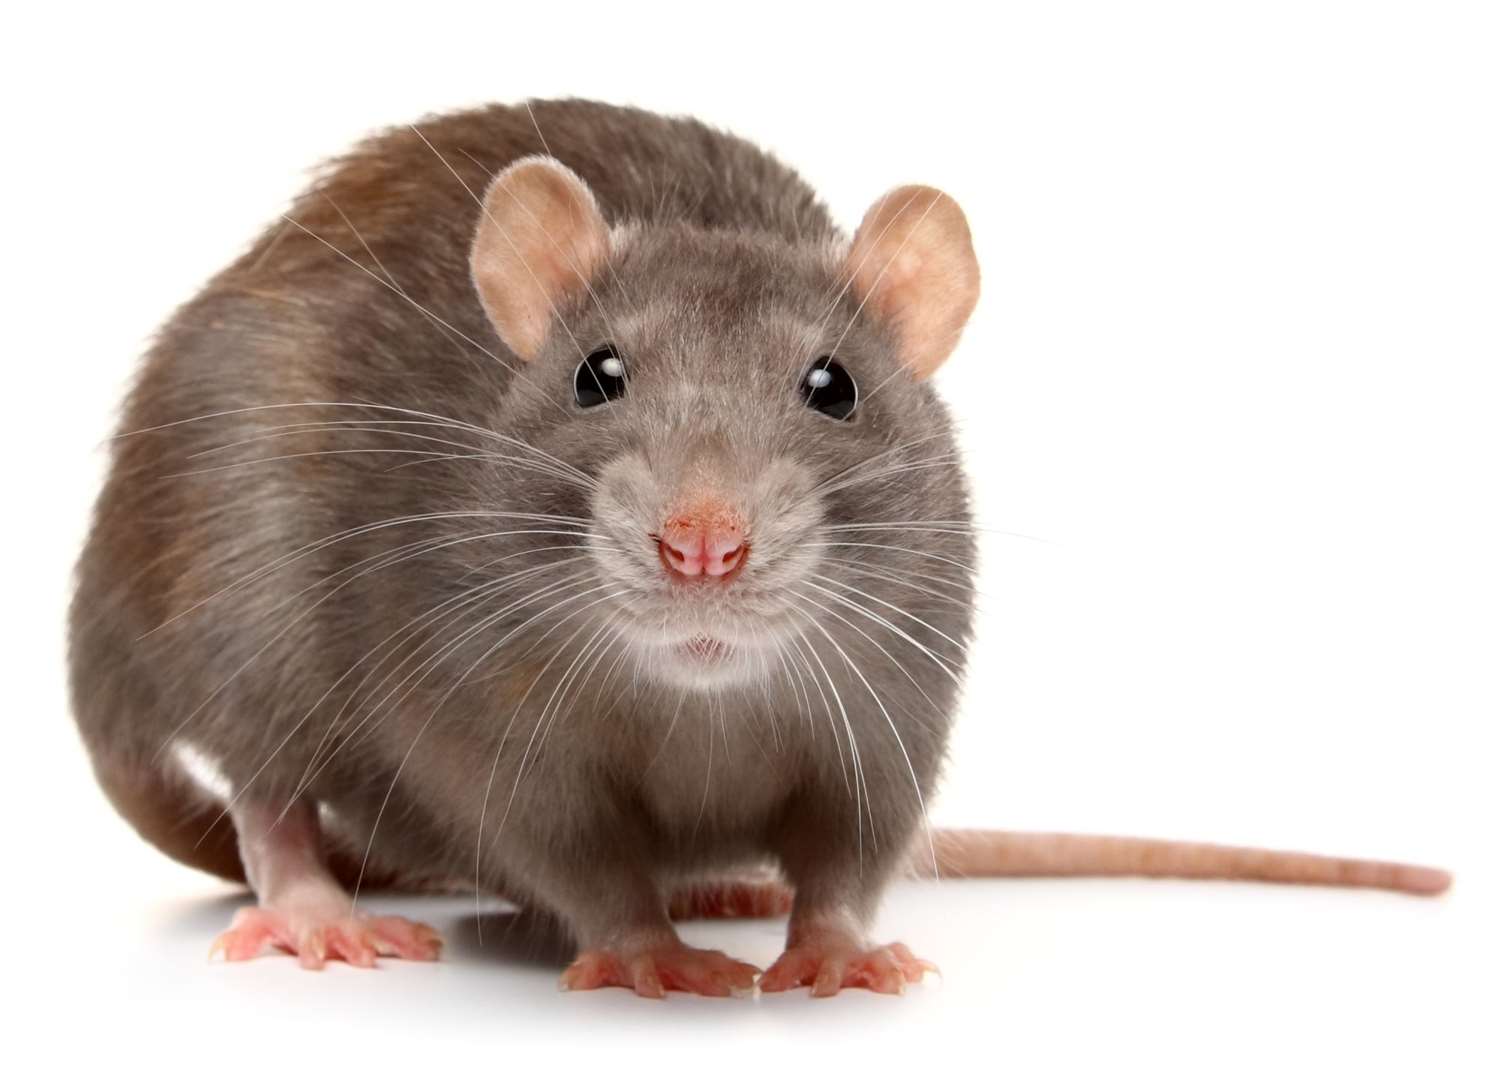 Stock image of a rat Credit: iStock